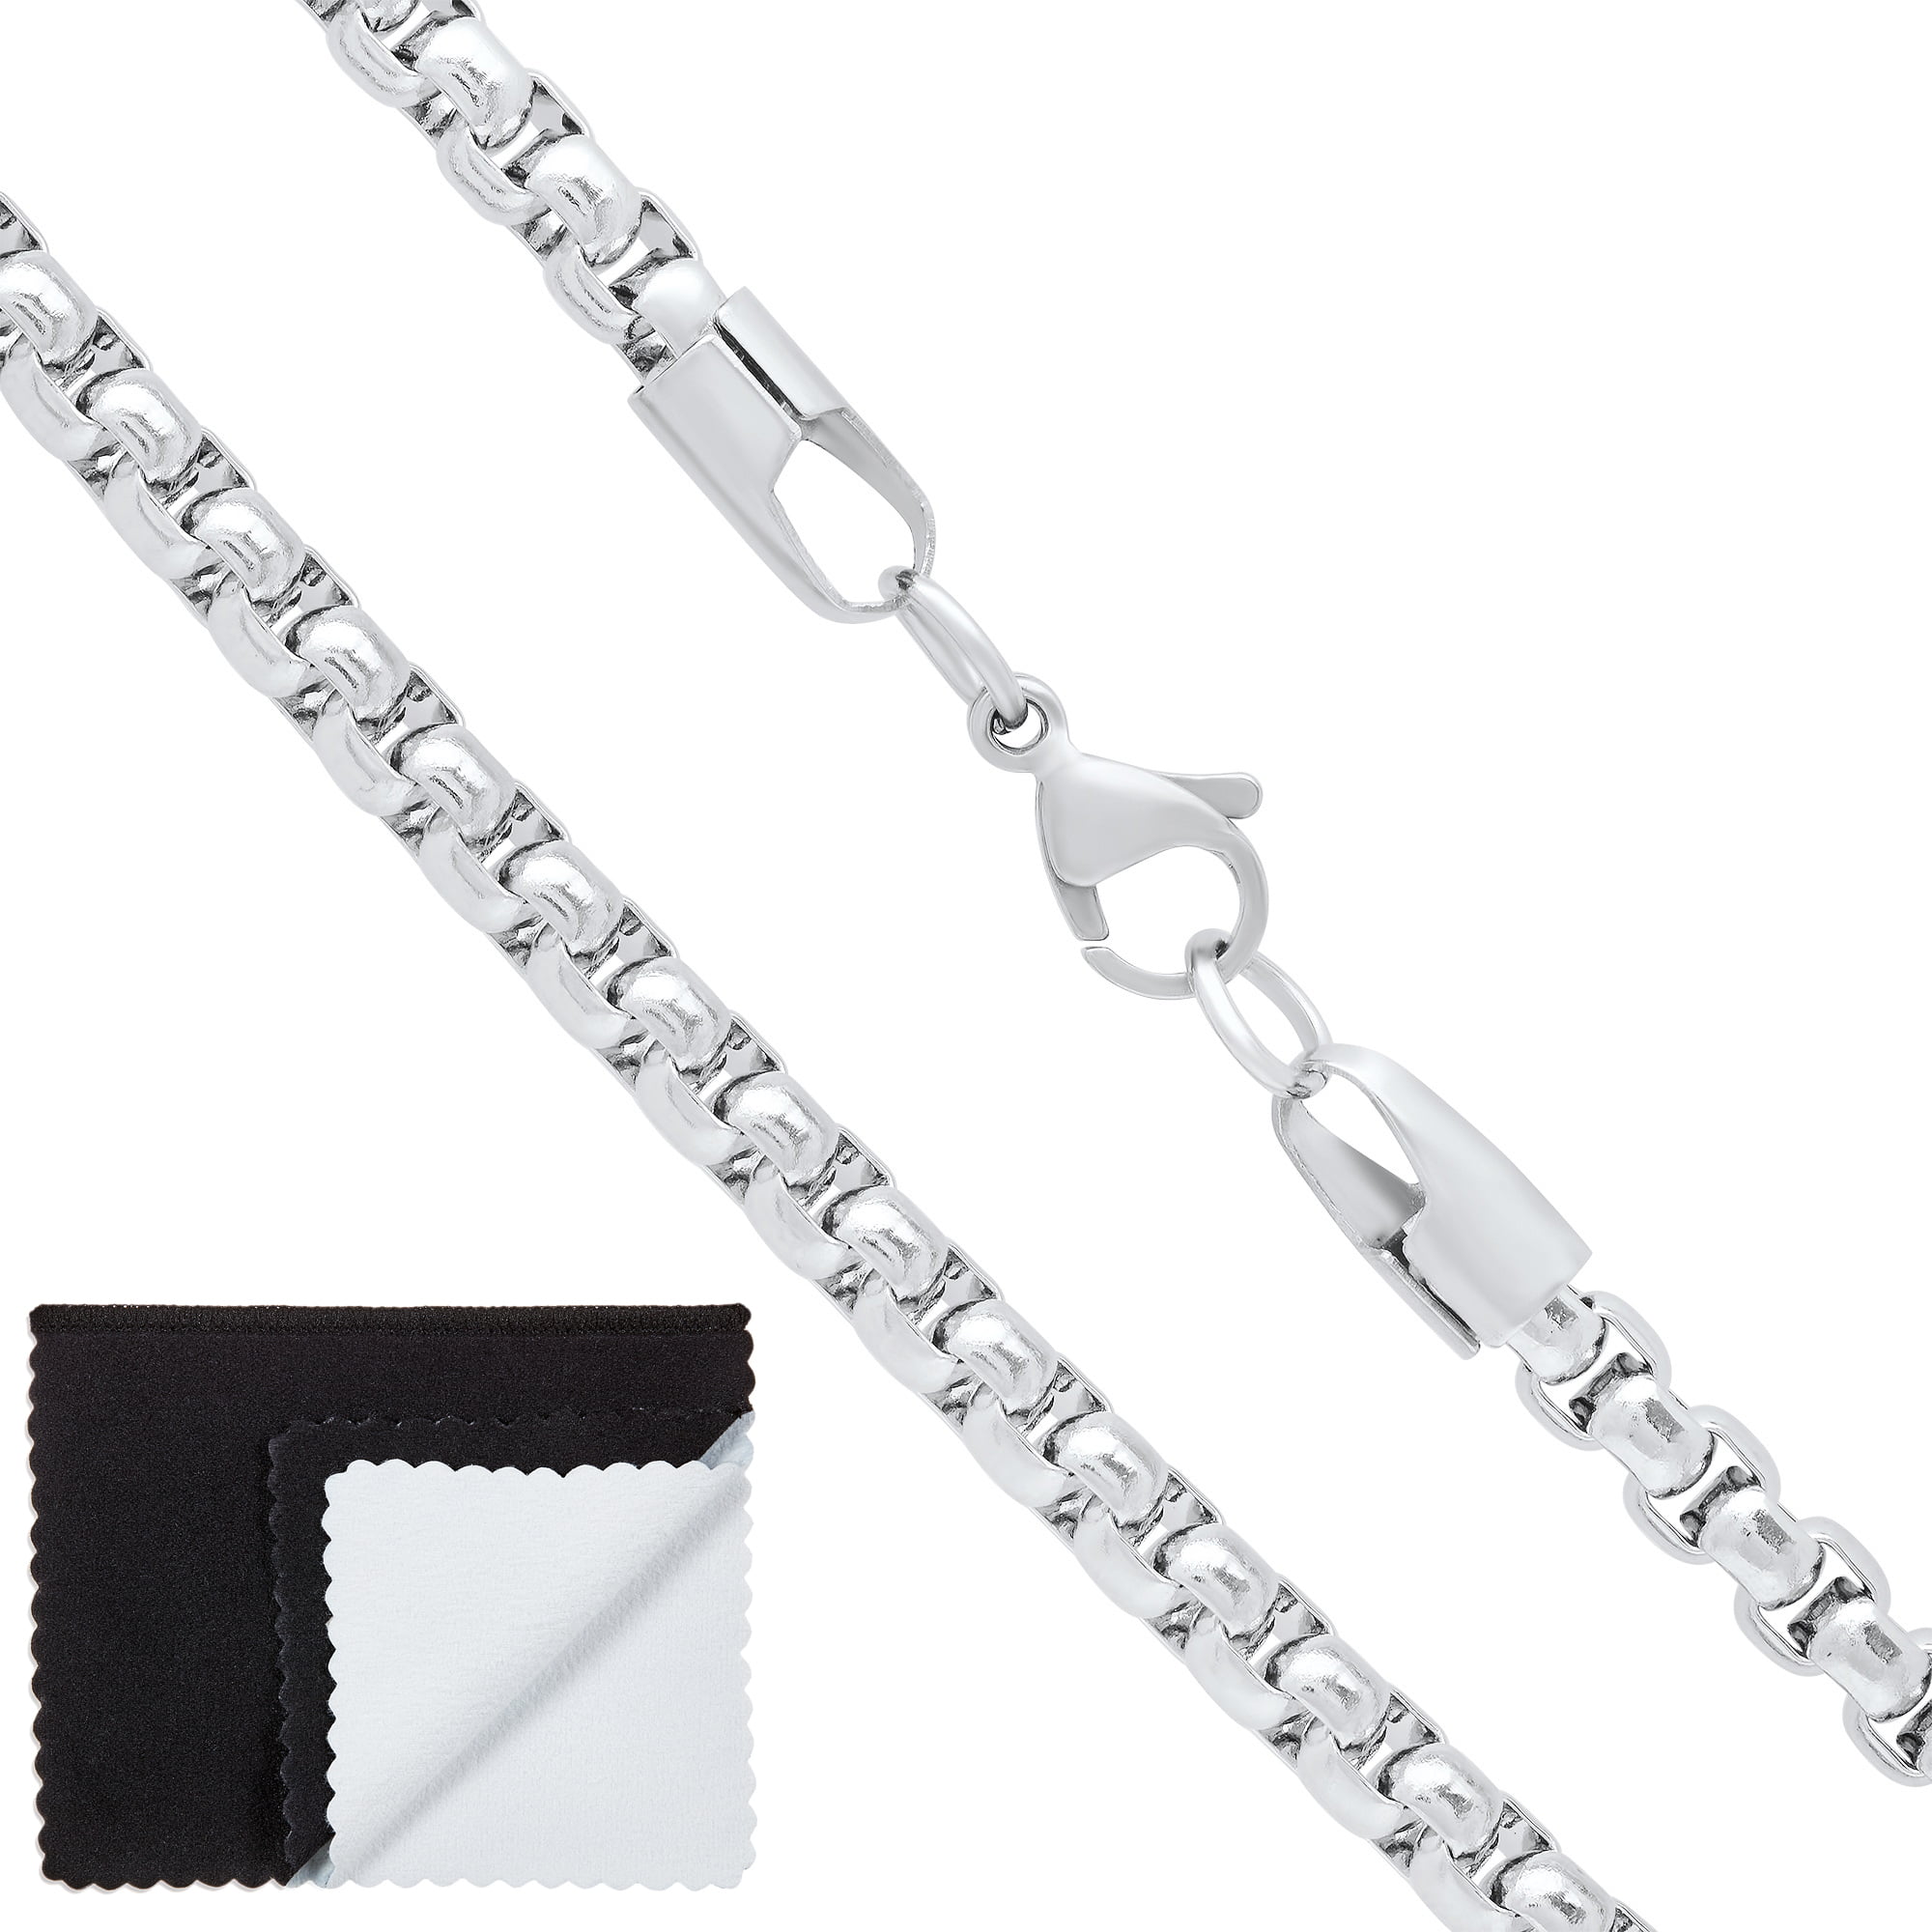 5mm Stainless Steel Chain Necklace  Stainless Steel Square Box Chain - 1pc  Stainless - Aliexpress